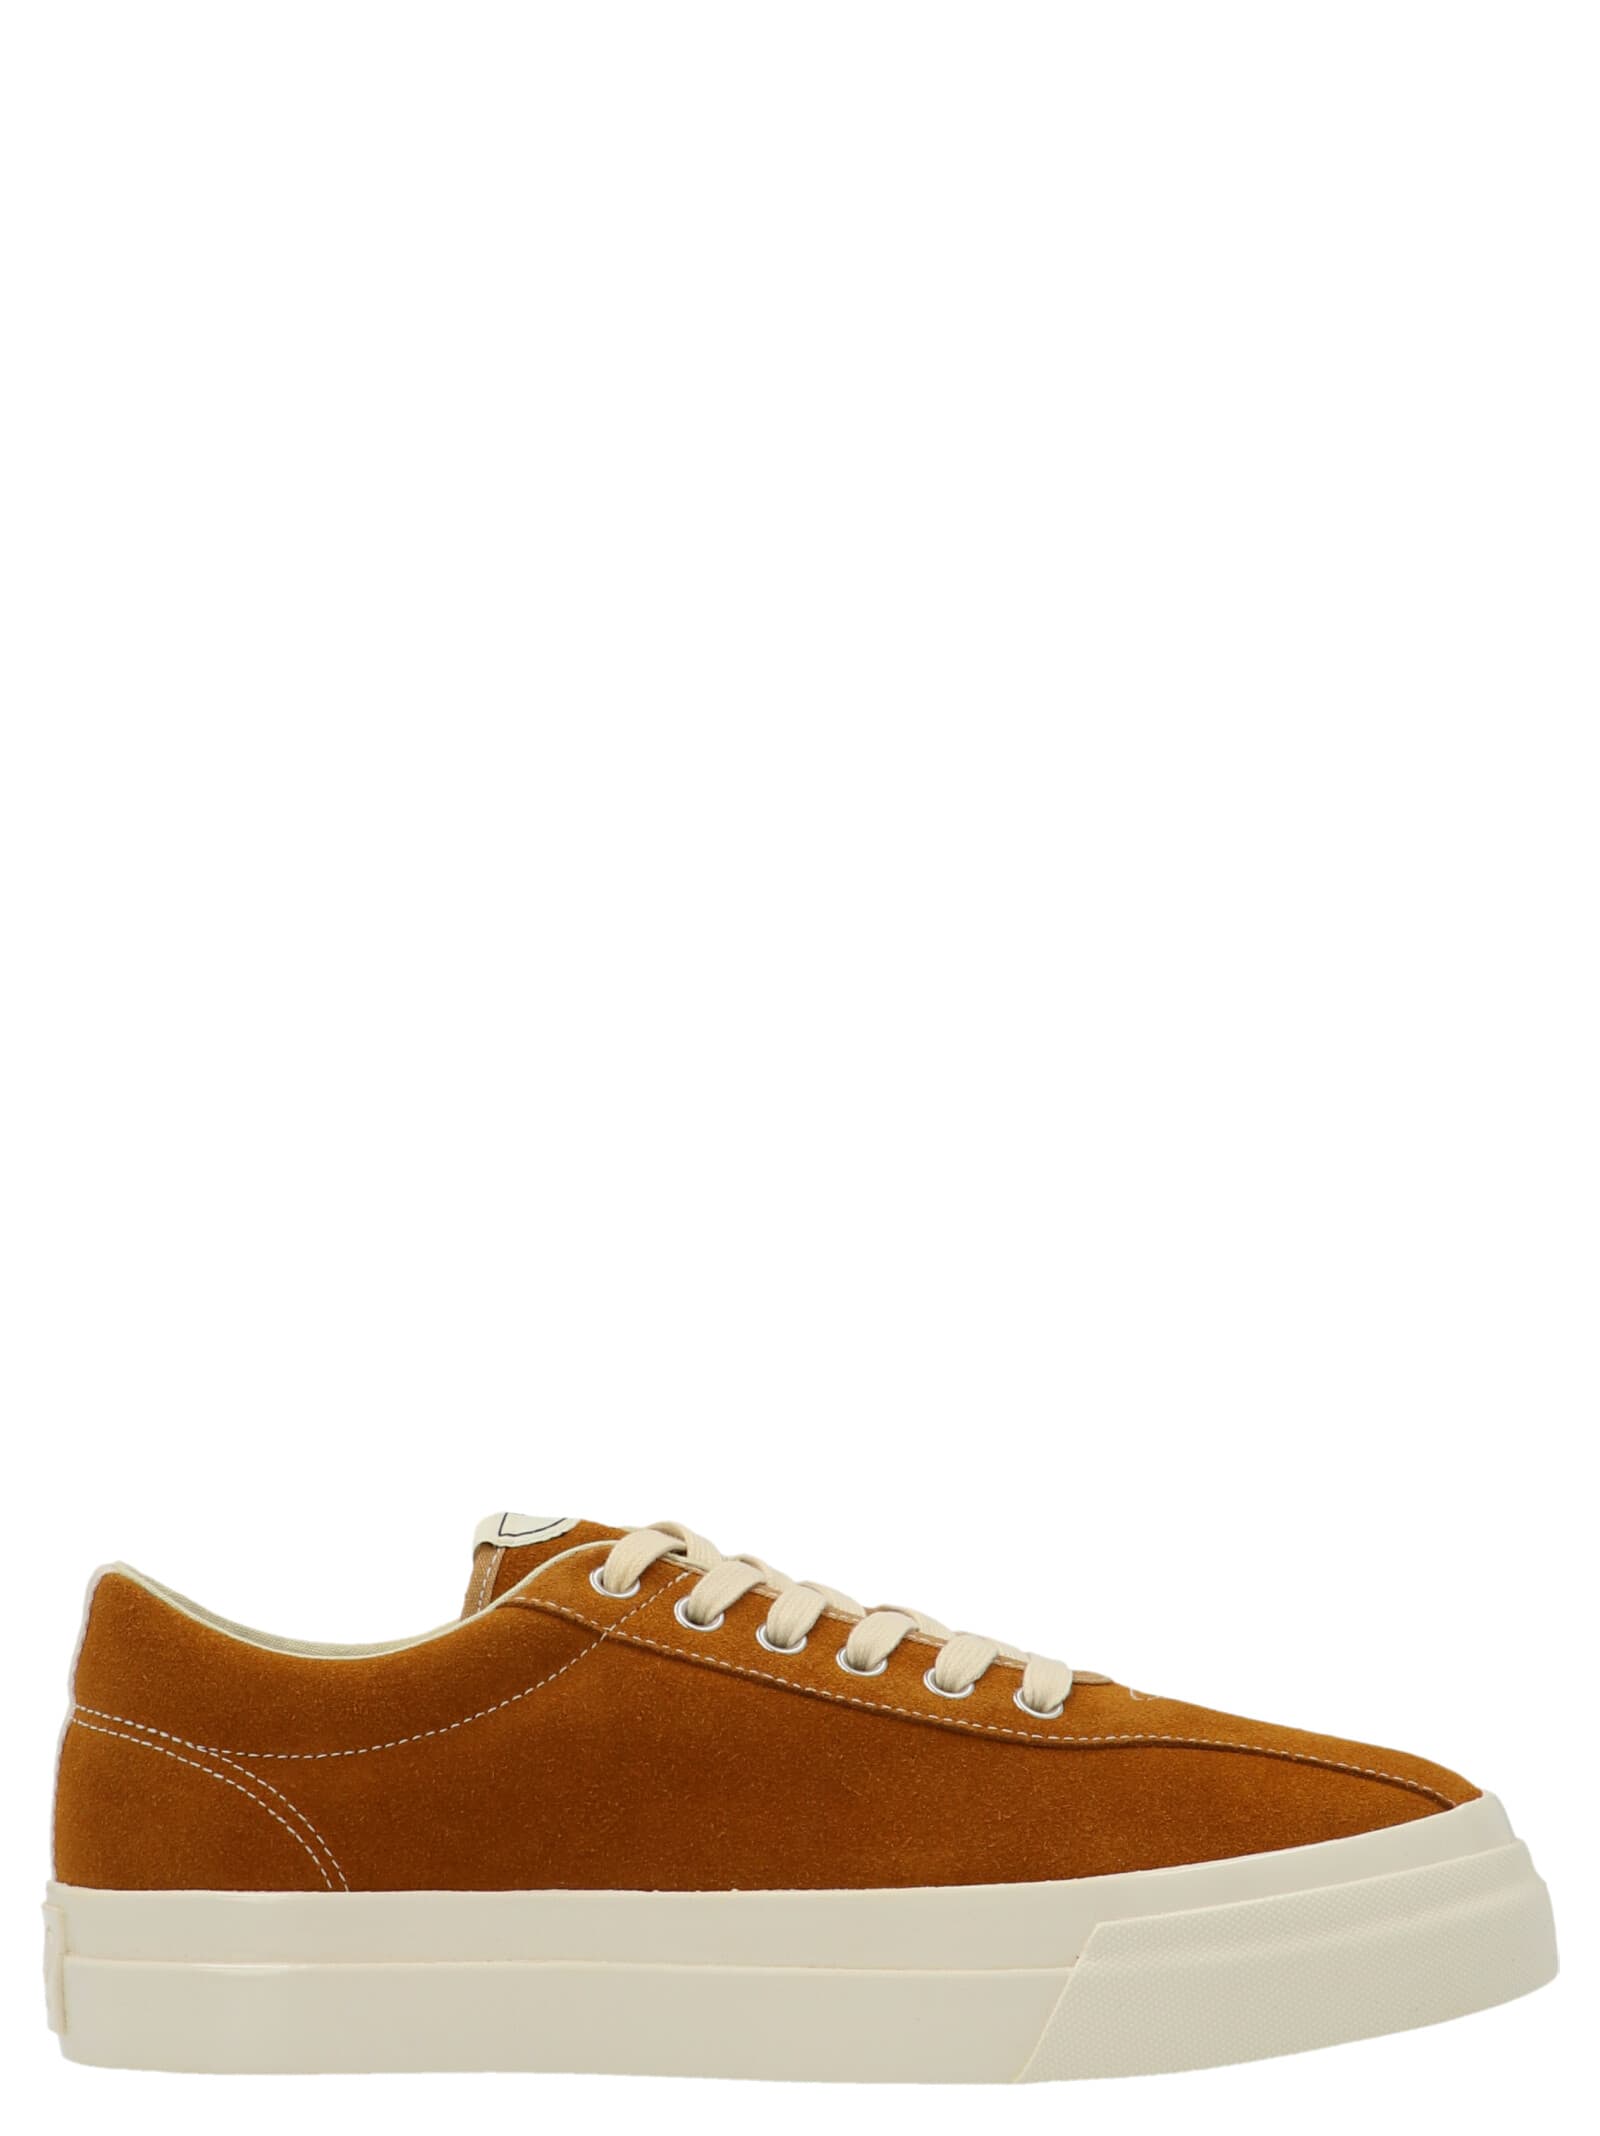 S.W.C Stepney Workers Club dellow Sneakers